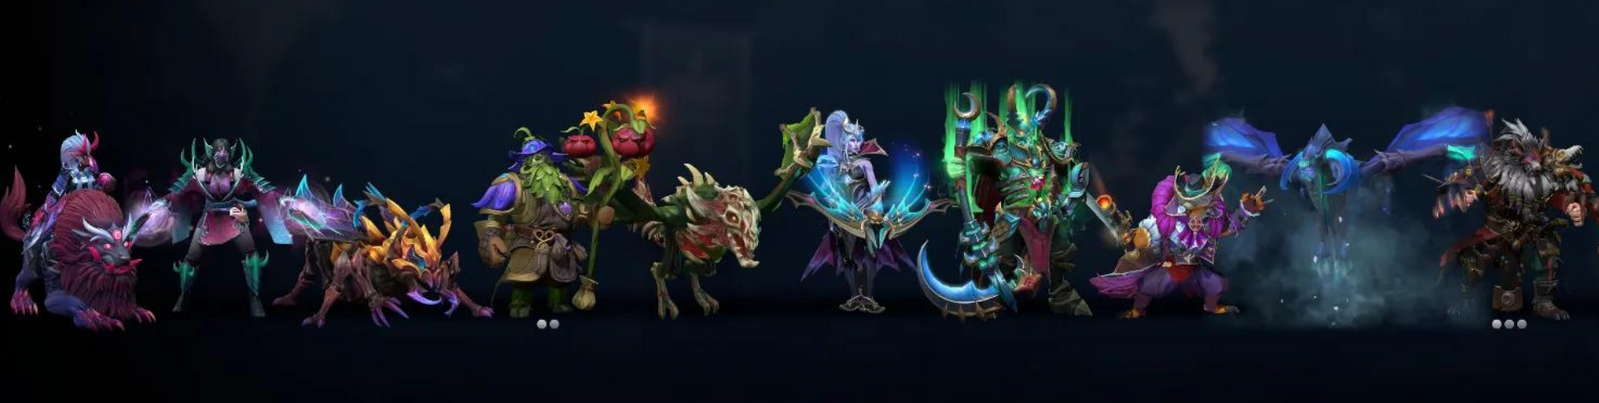 Normal Treasures Set for DOTA 2 Chest of Endless Days Event